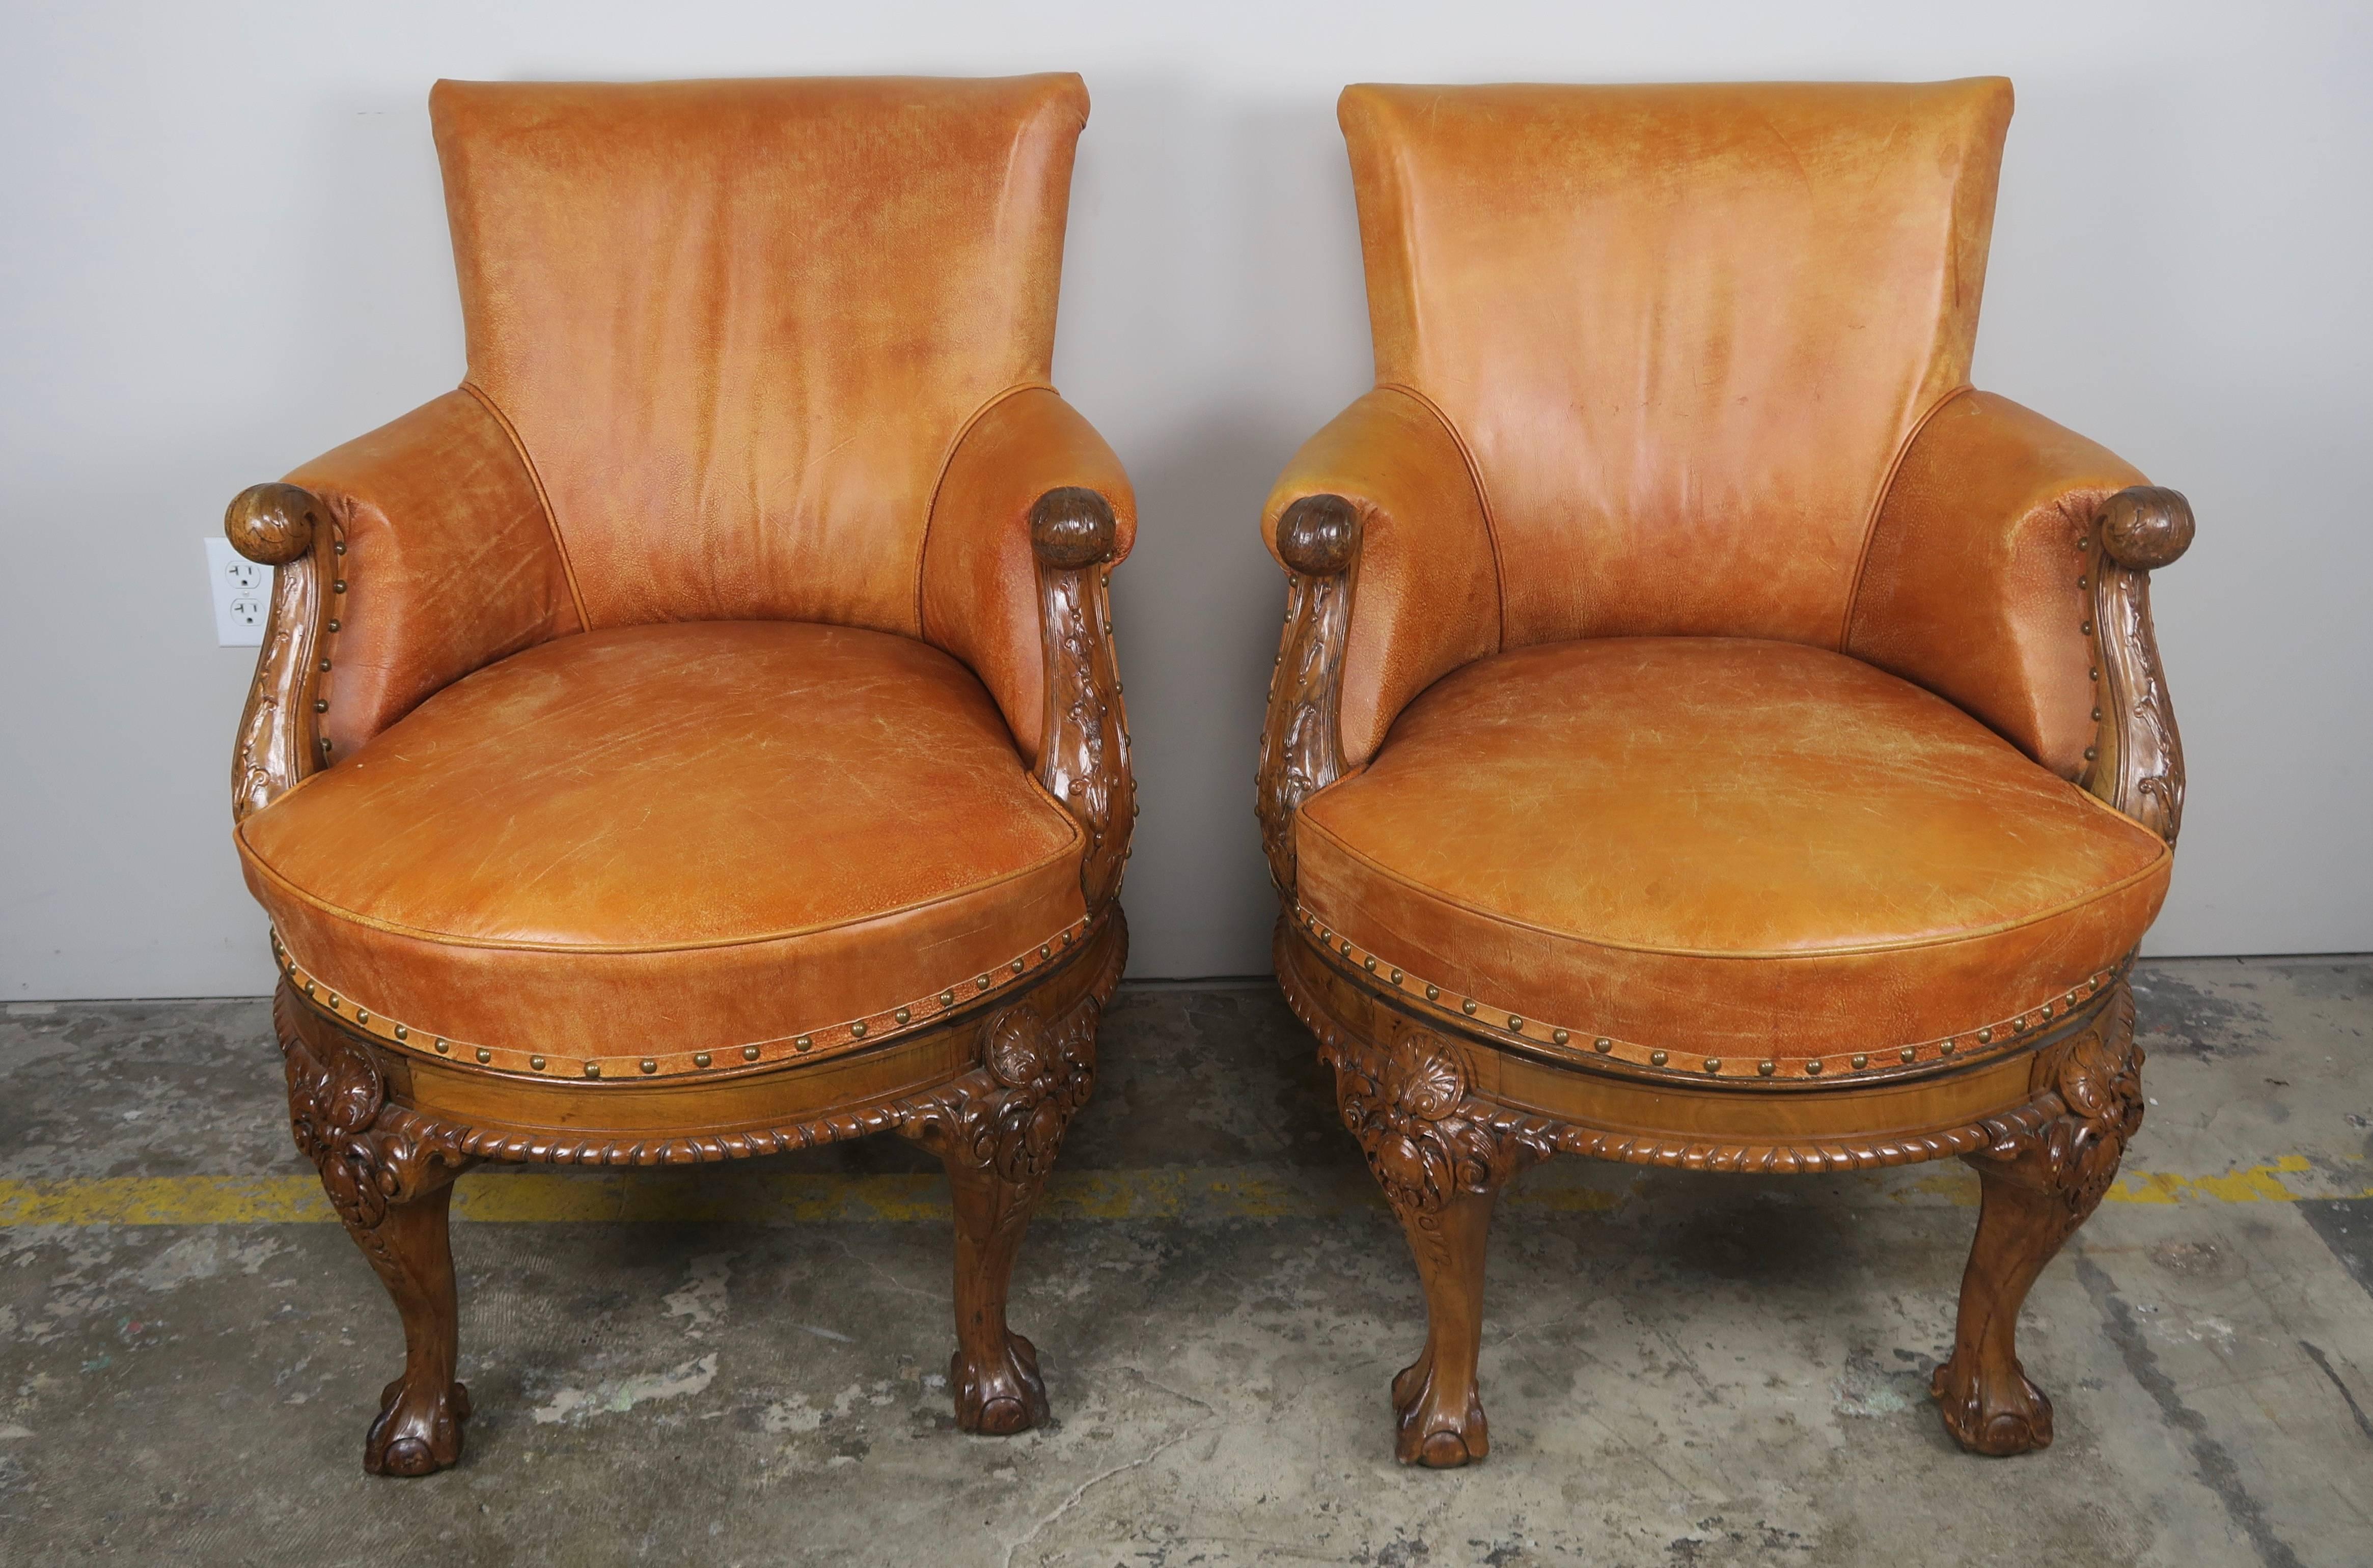 Pair of English George II style walnut swivel library chairs upholstered in original caramel colored leather with leather gimp and spaced nail head trim detail. The chairs stand on four beautifully carved legs ending in ball and claw feet.